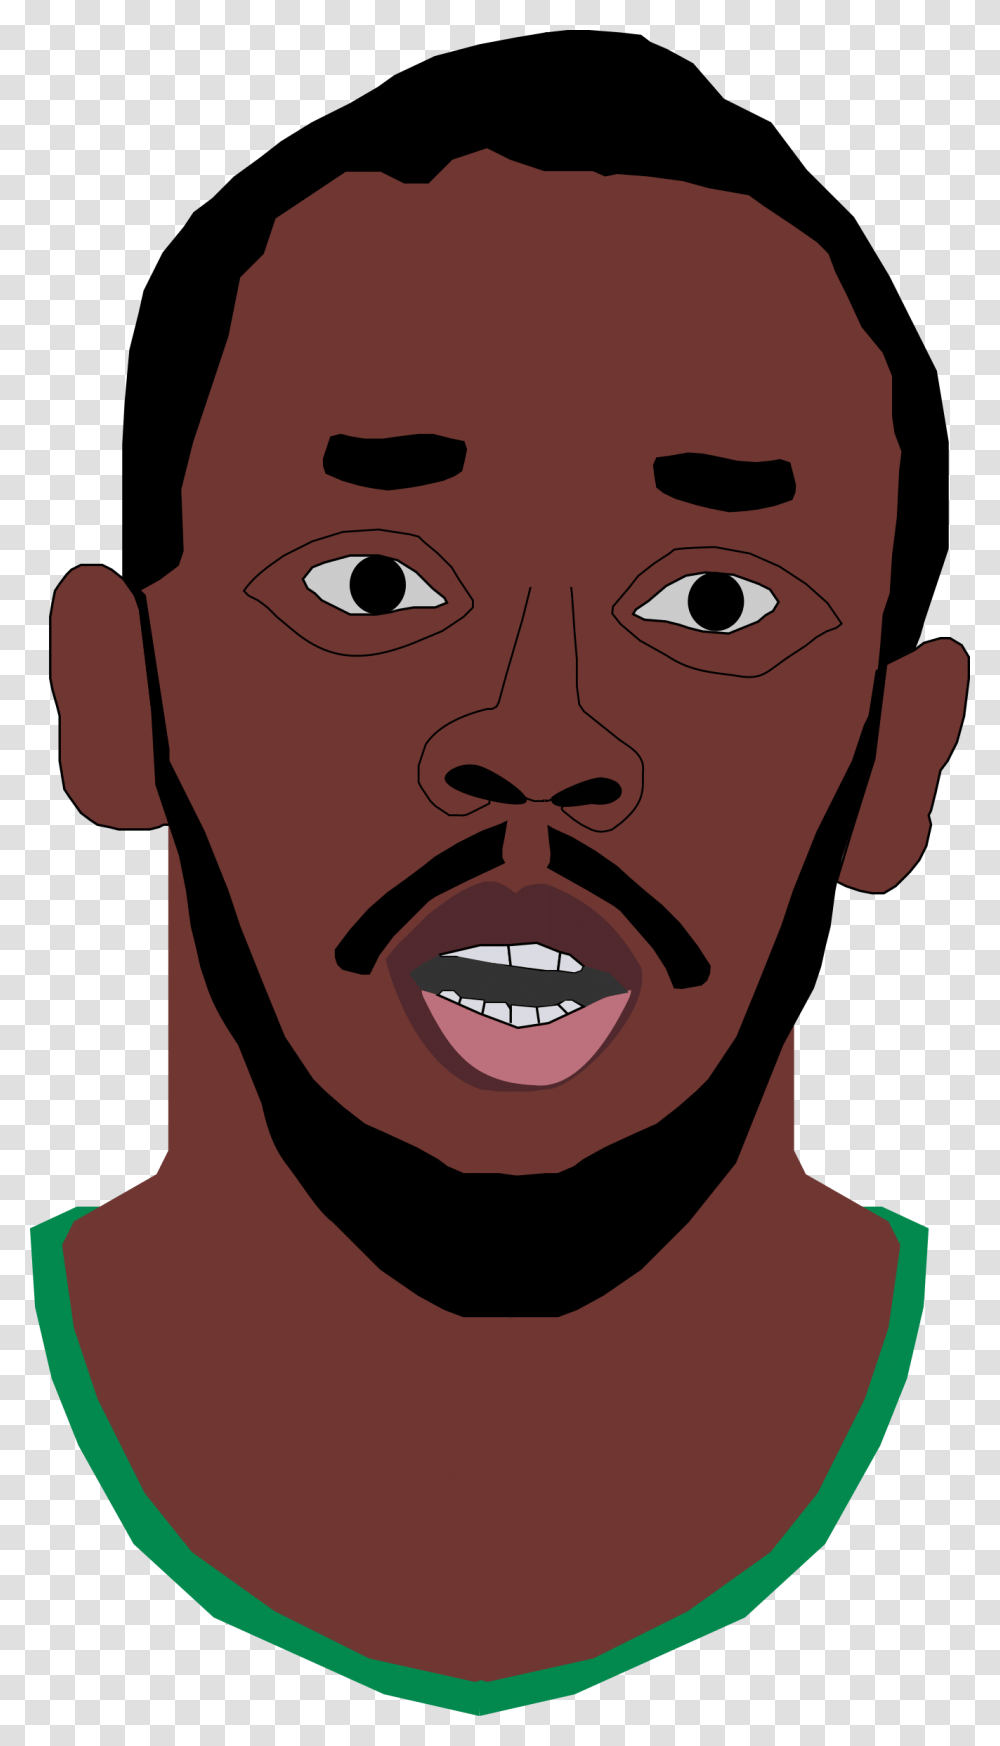 Usain Bolt's Head Background, Face, Mouth, Lip, Skin Transparent Png